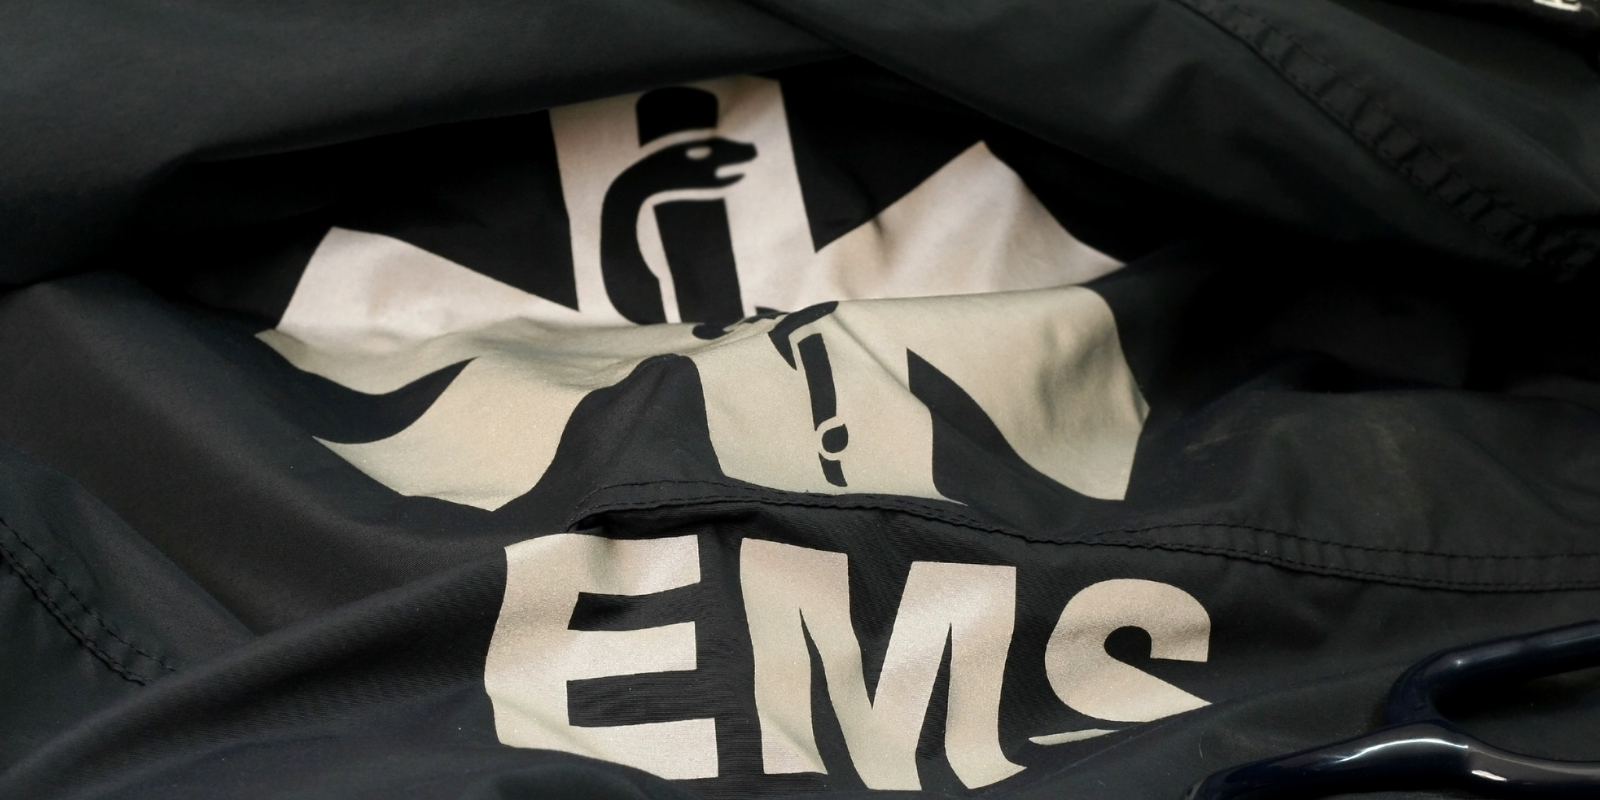 the back of an ems worker's jacket